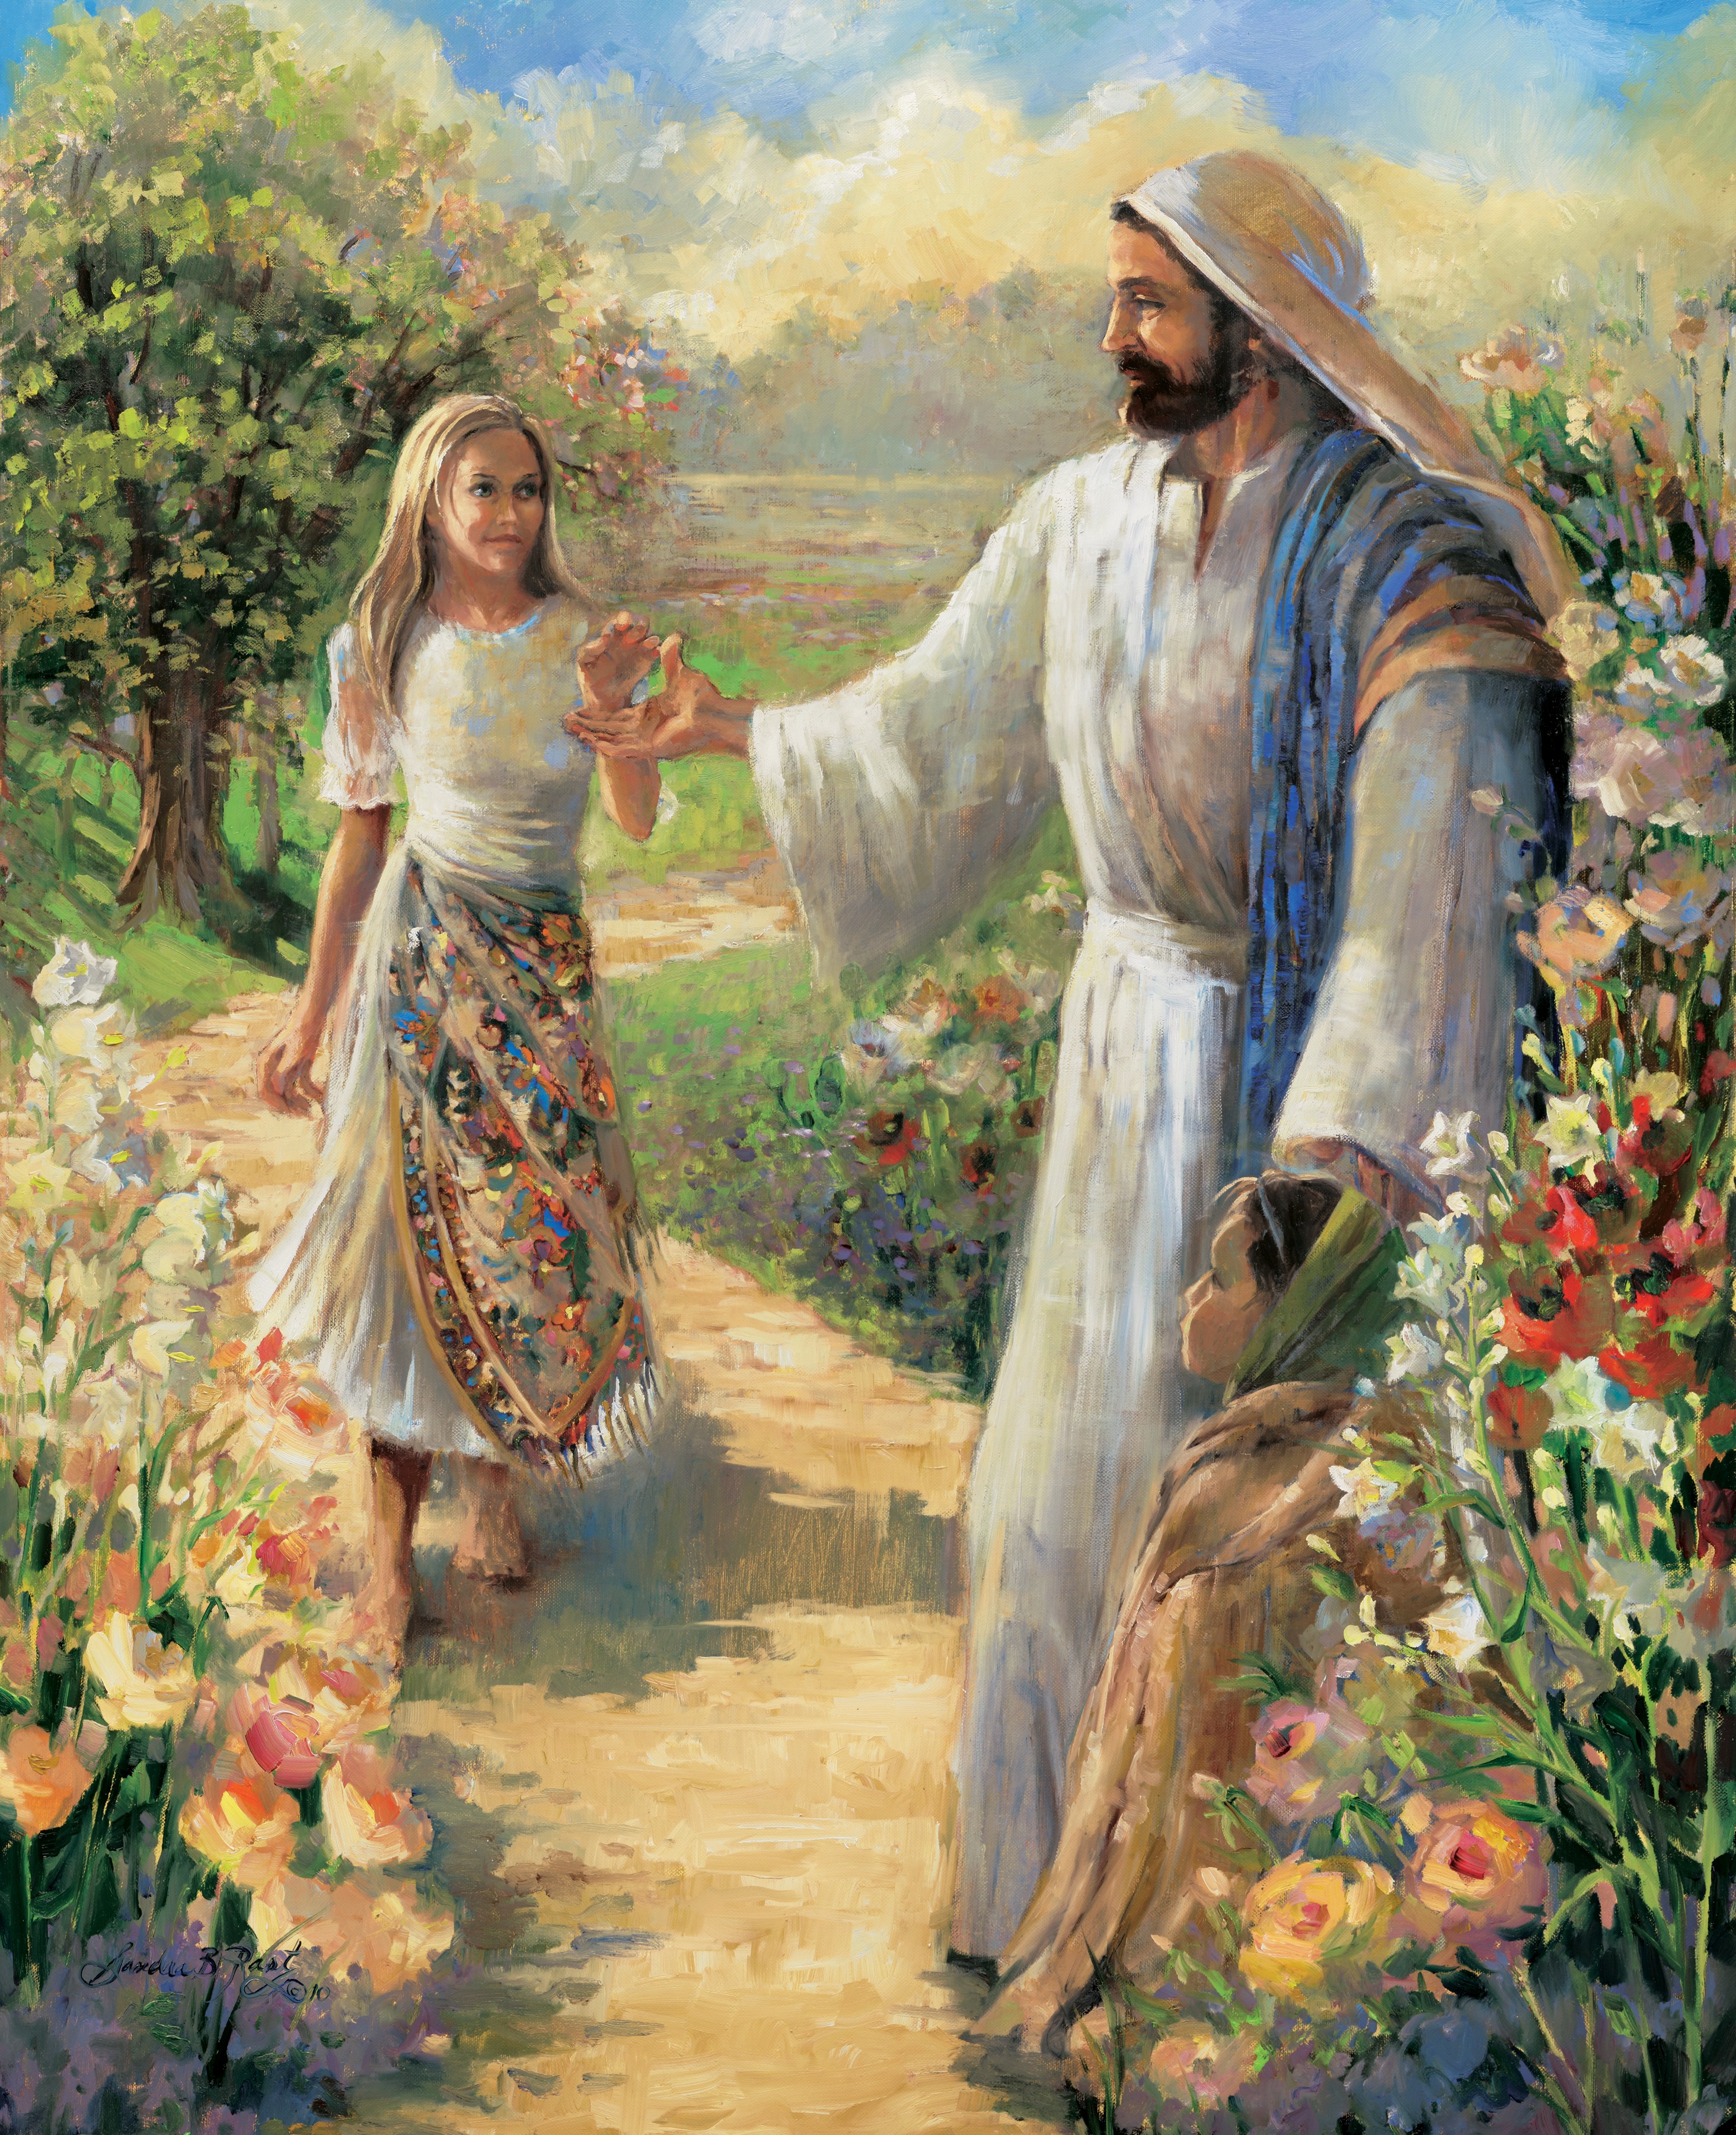 An oil painting by Sandra Rast depicting Christ reaching out to a woman to join Him and a child as they walk in a garden.